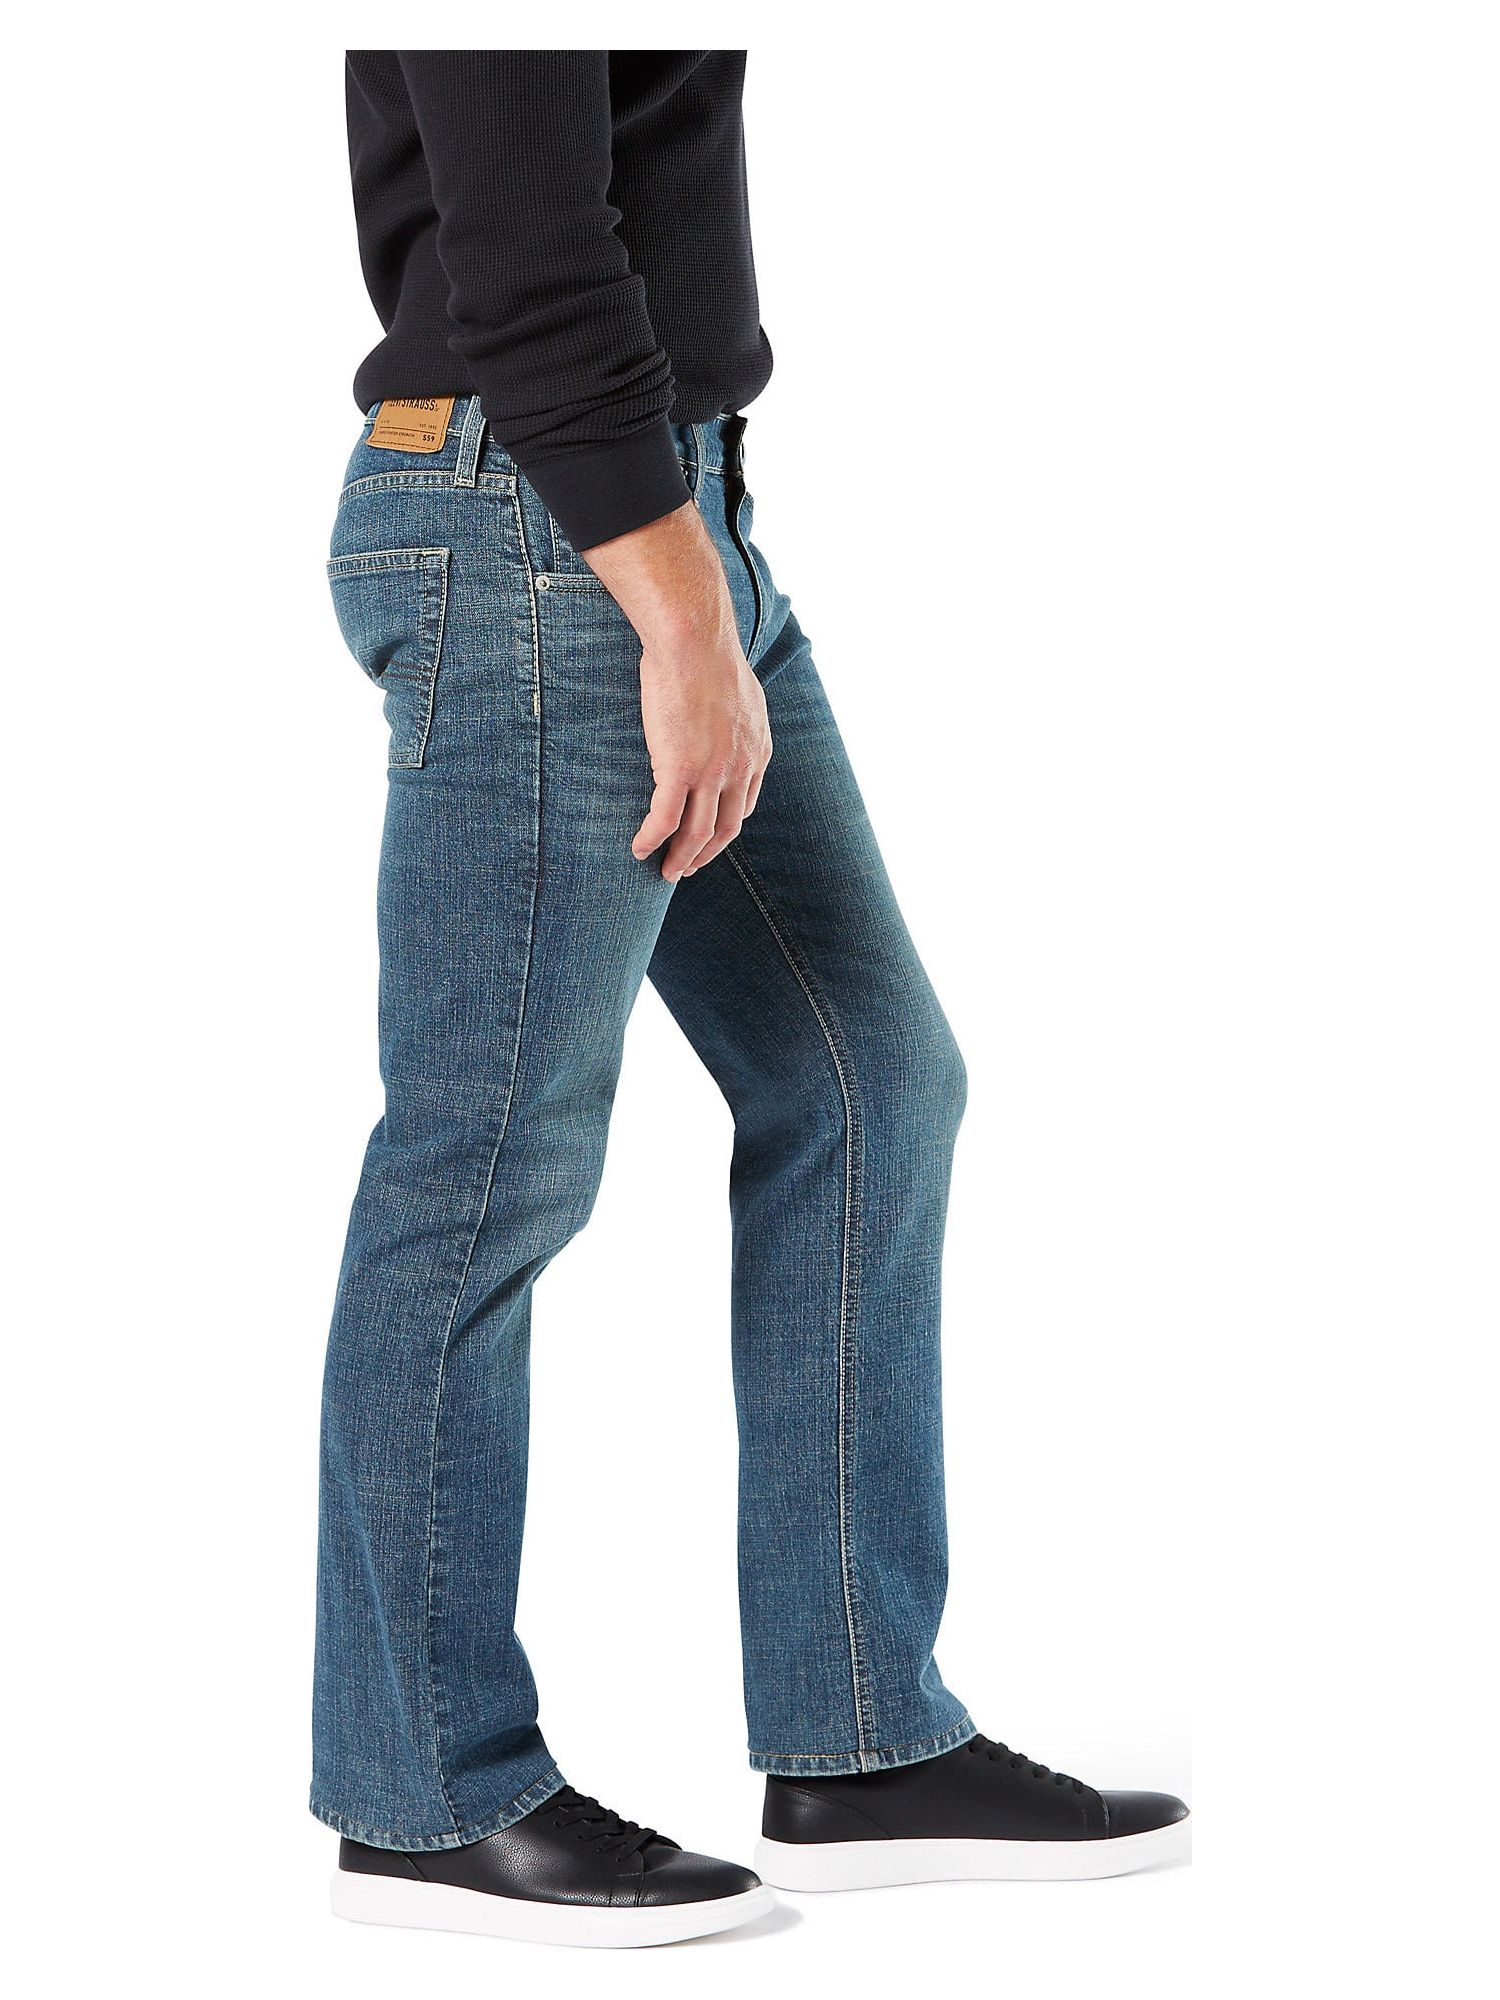 Signature by Levi Strauss & Co. Men's and Big and Tall Bootcut Jeans - image 5 of 9